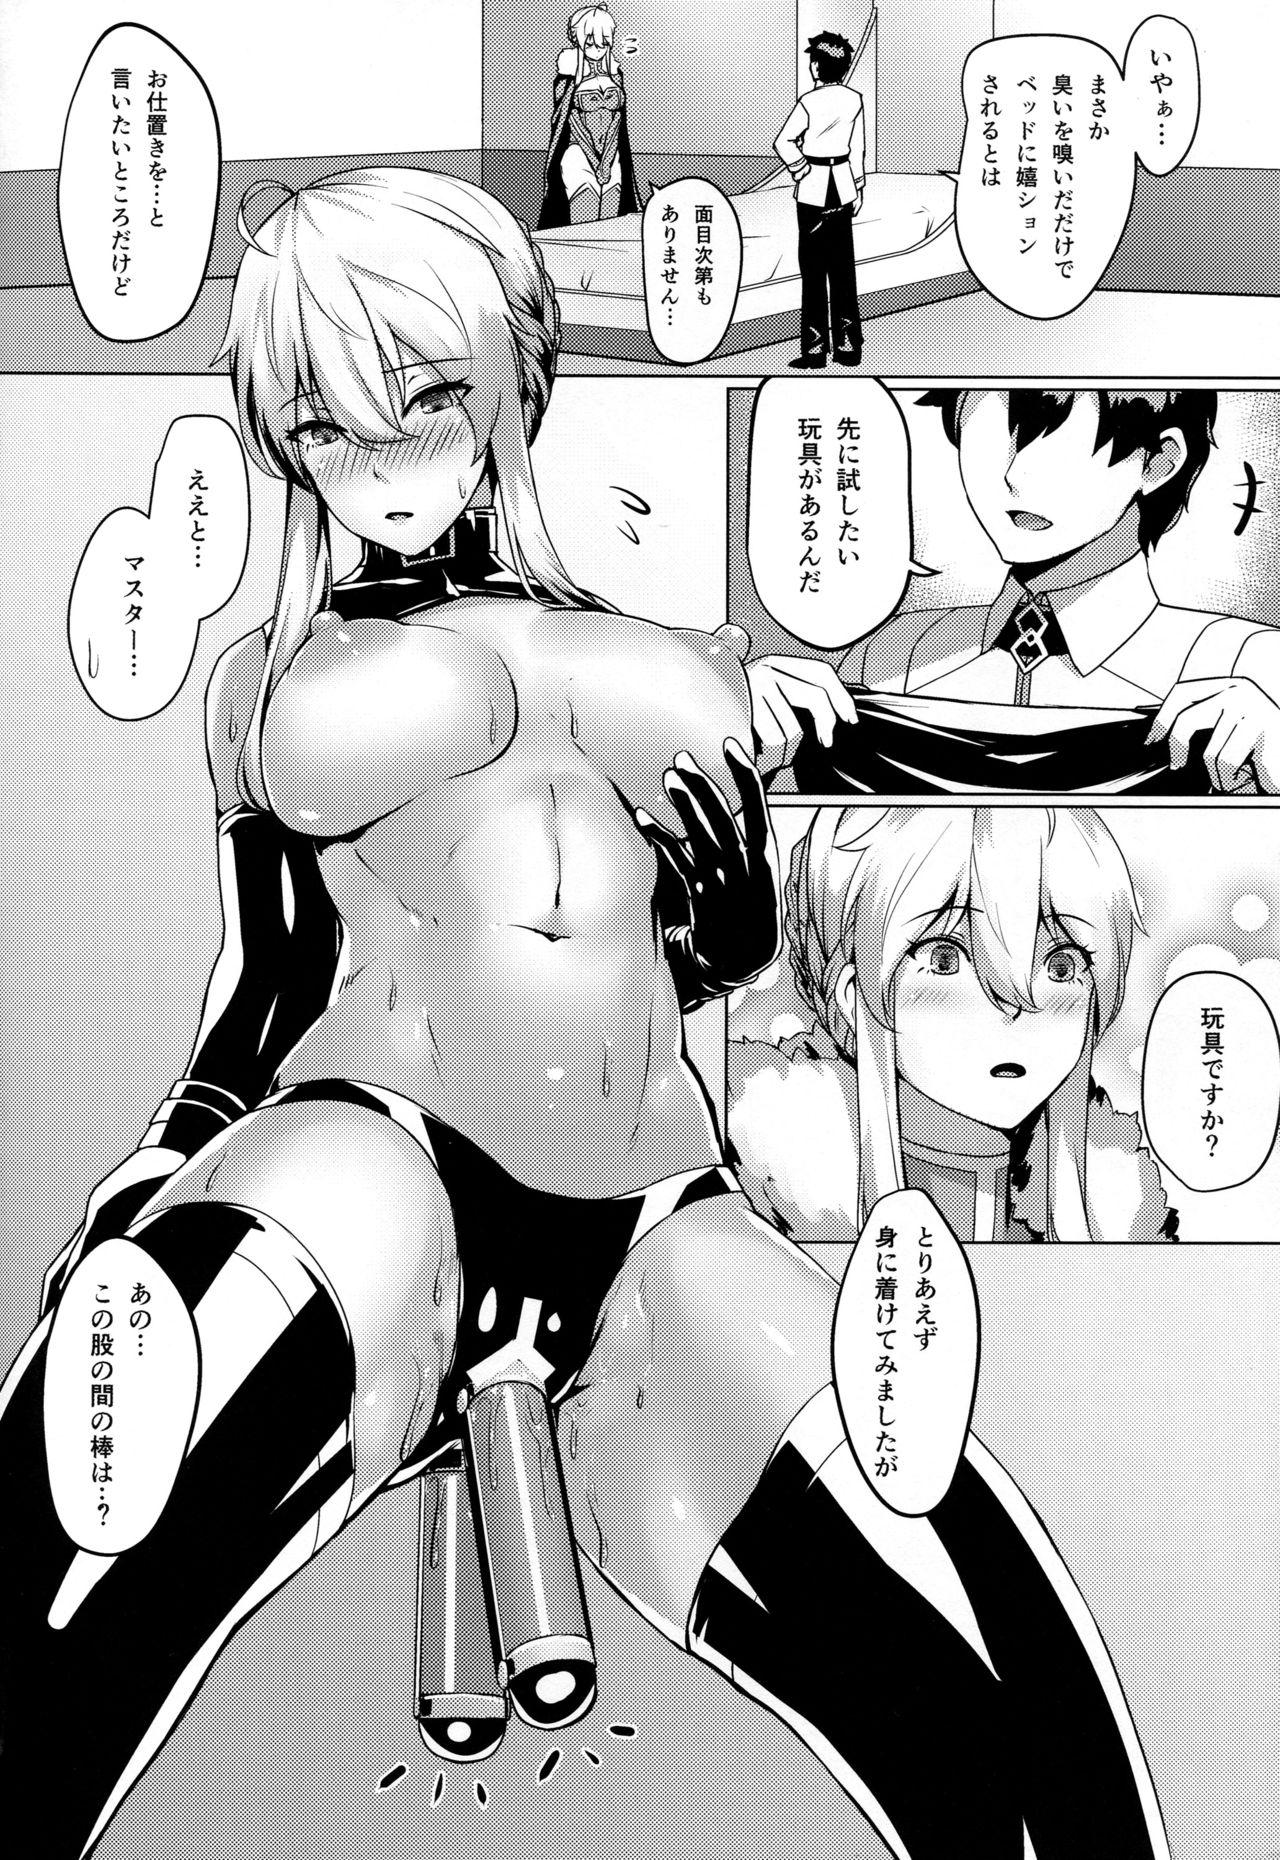 Cunt Like Attracts Like - Fate grand order Nude - Page 7